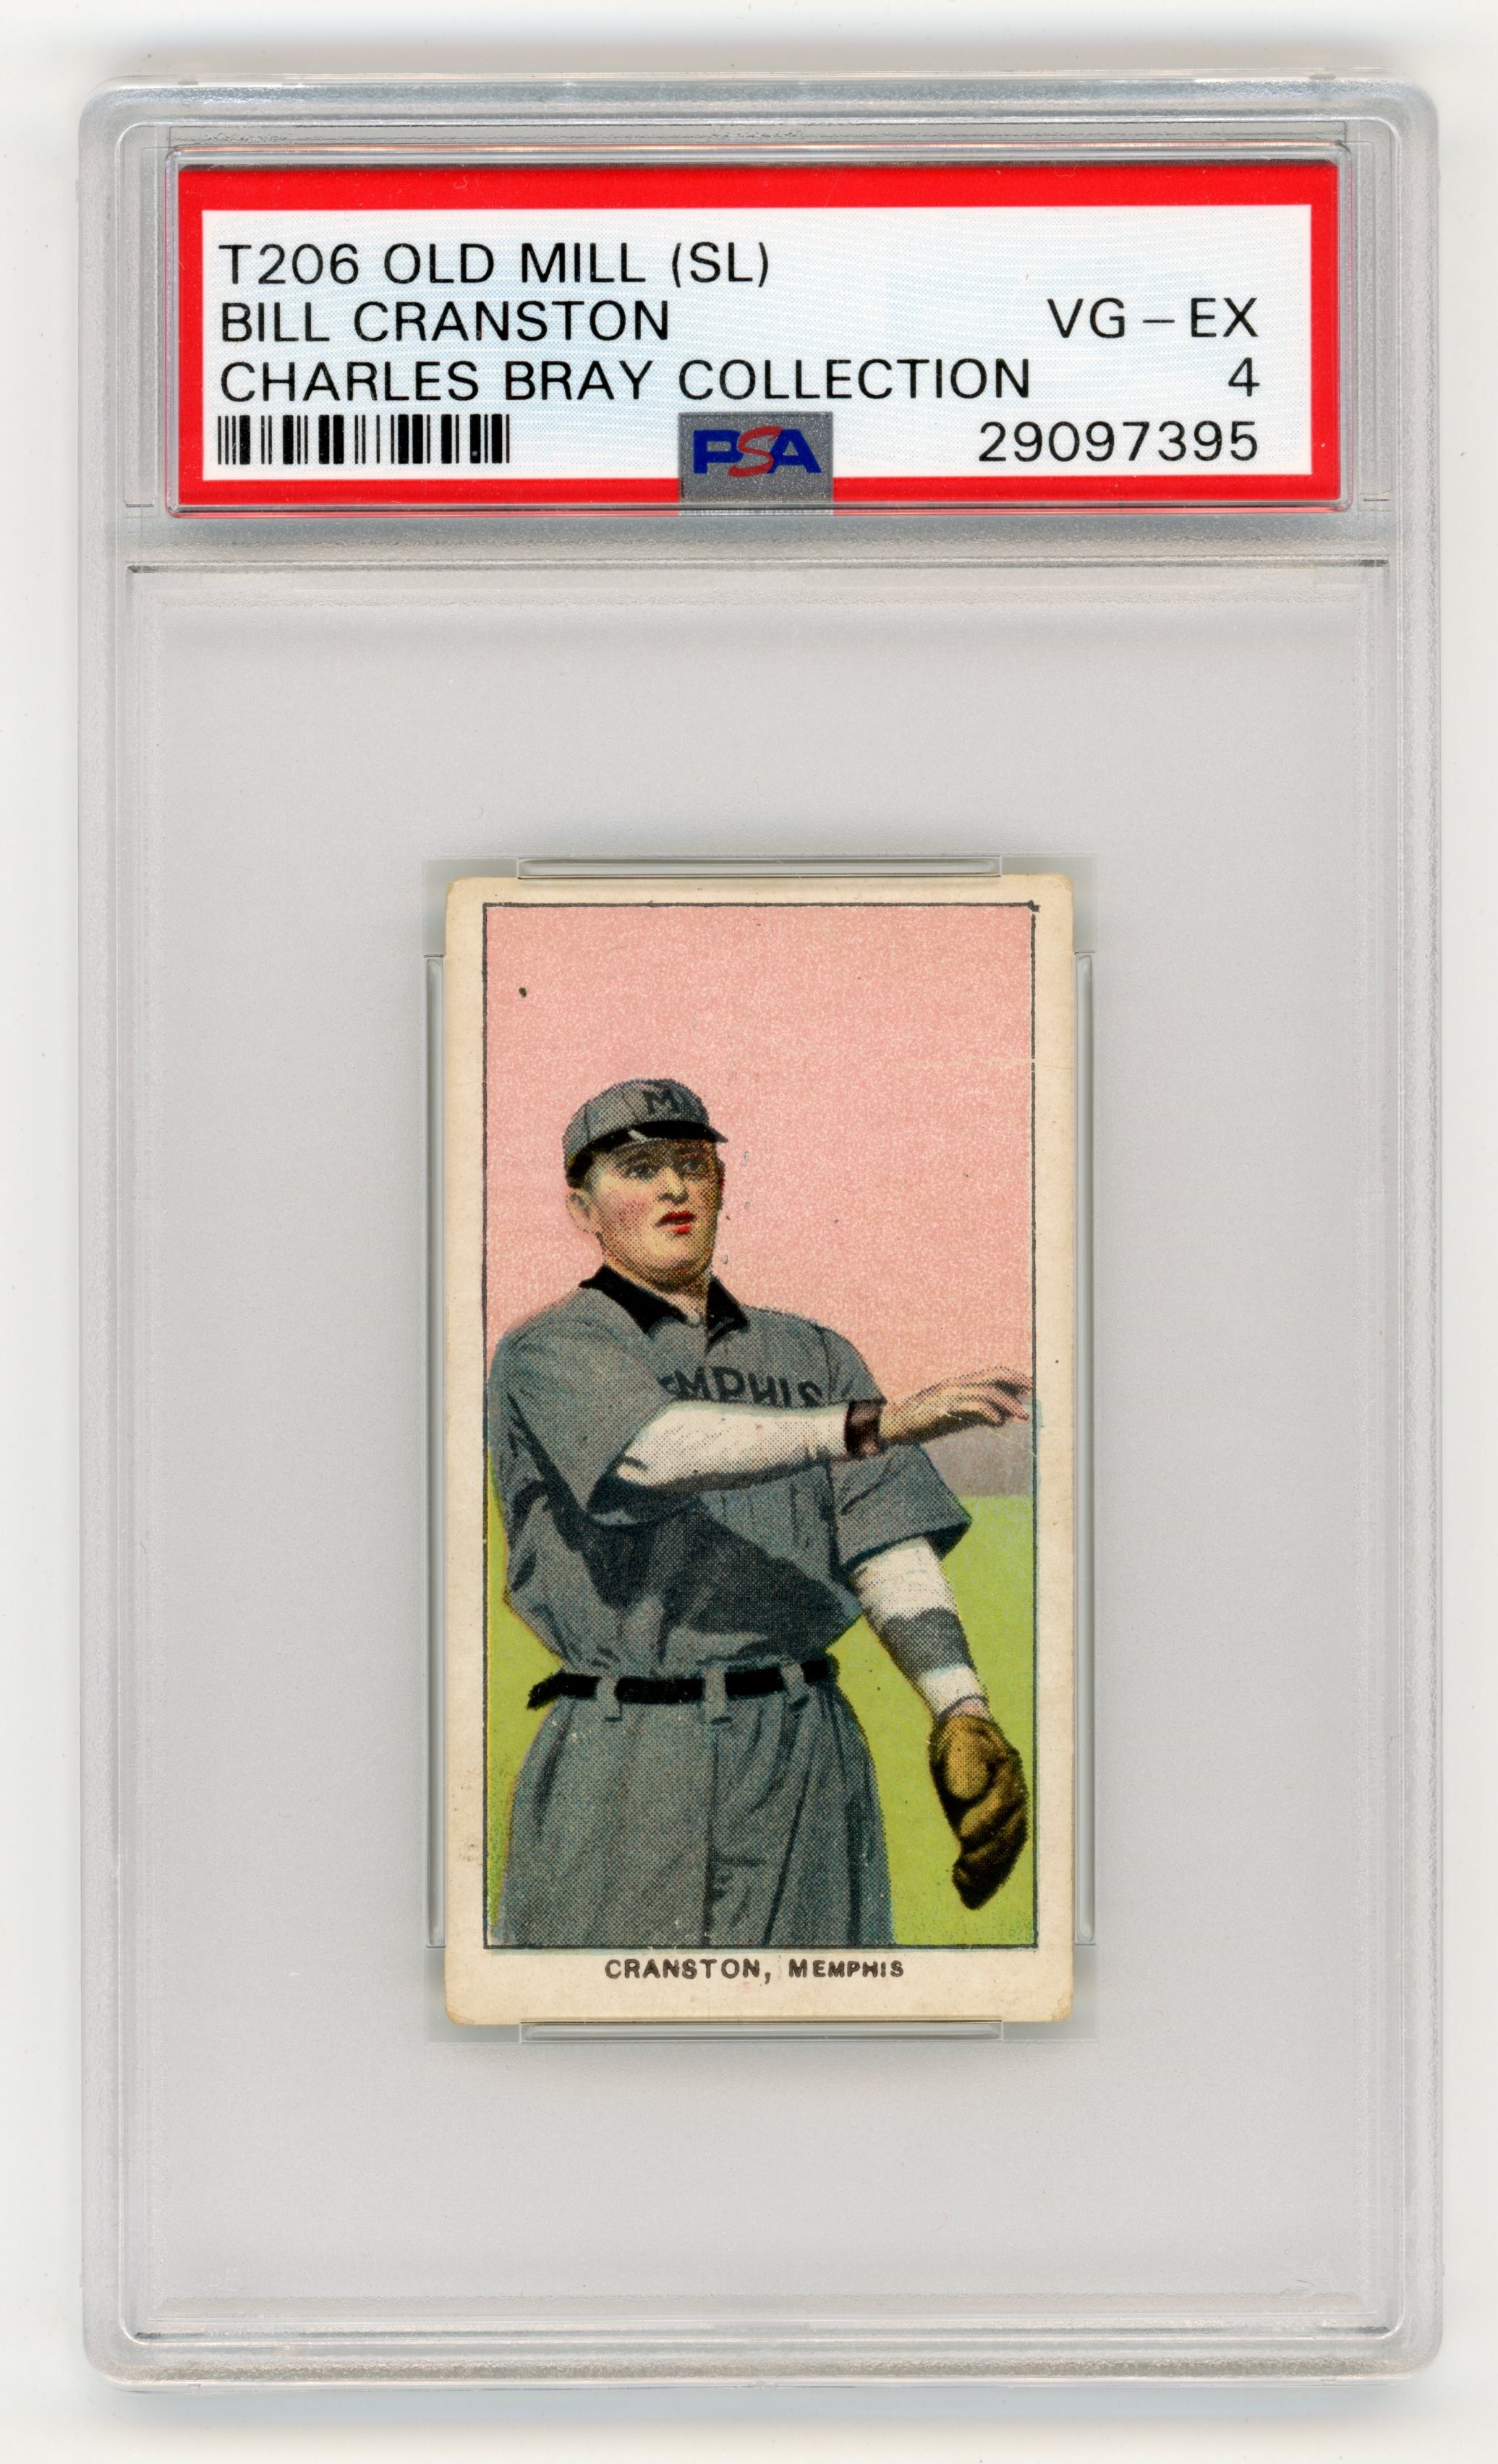 T206 Old Mill (SL) Bill Cranston PSA VG-EX 4 From the Charles Bray Collection.